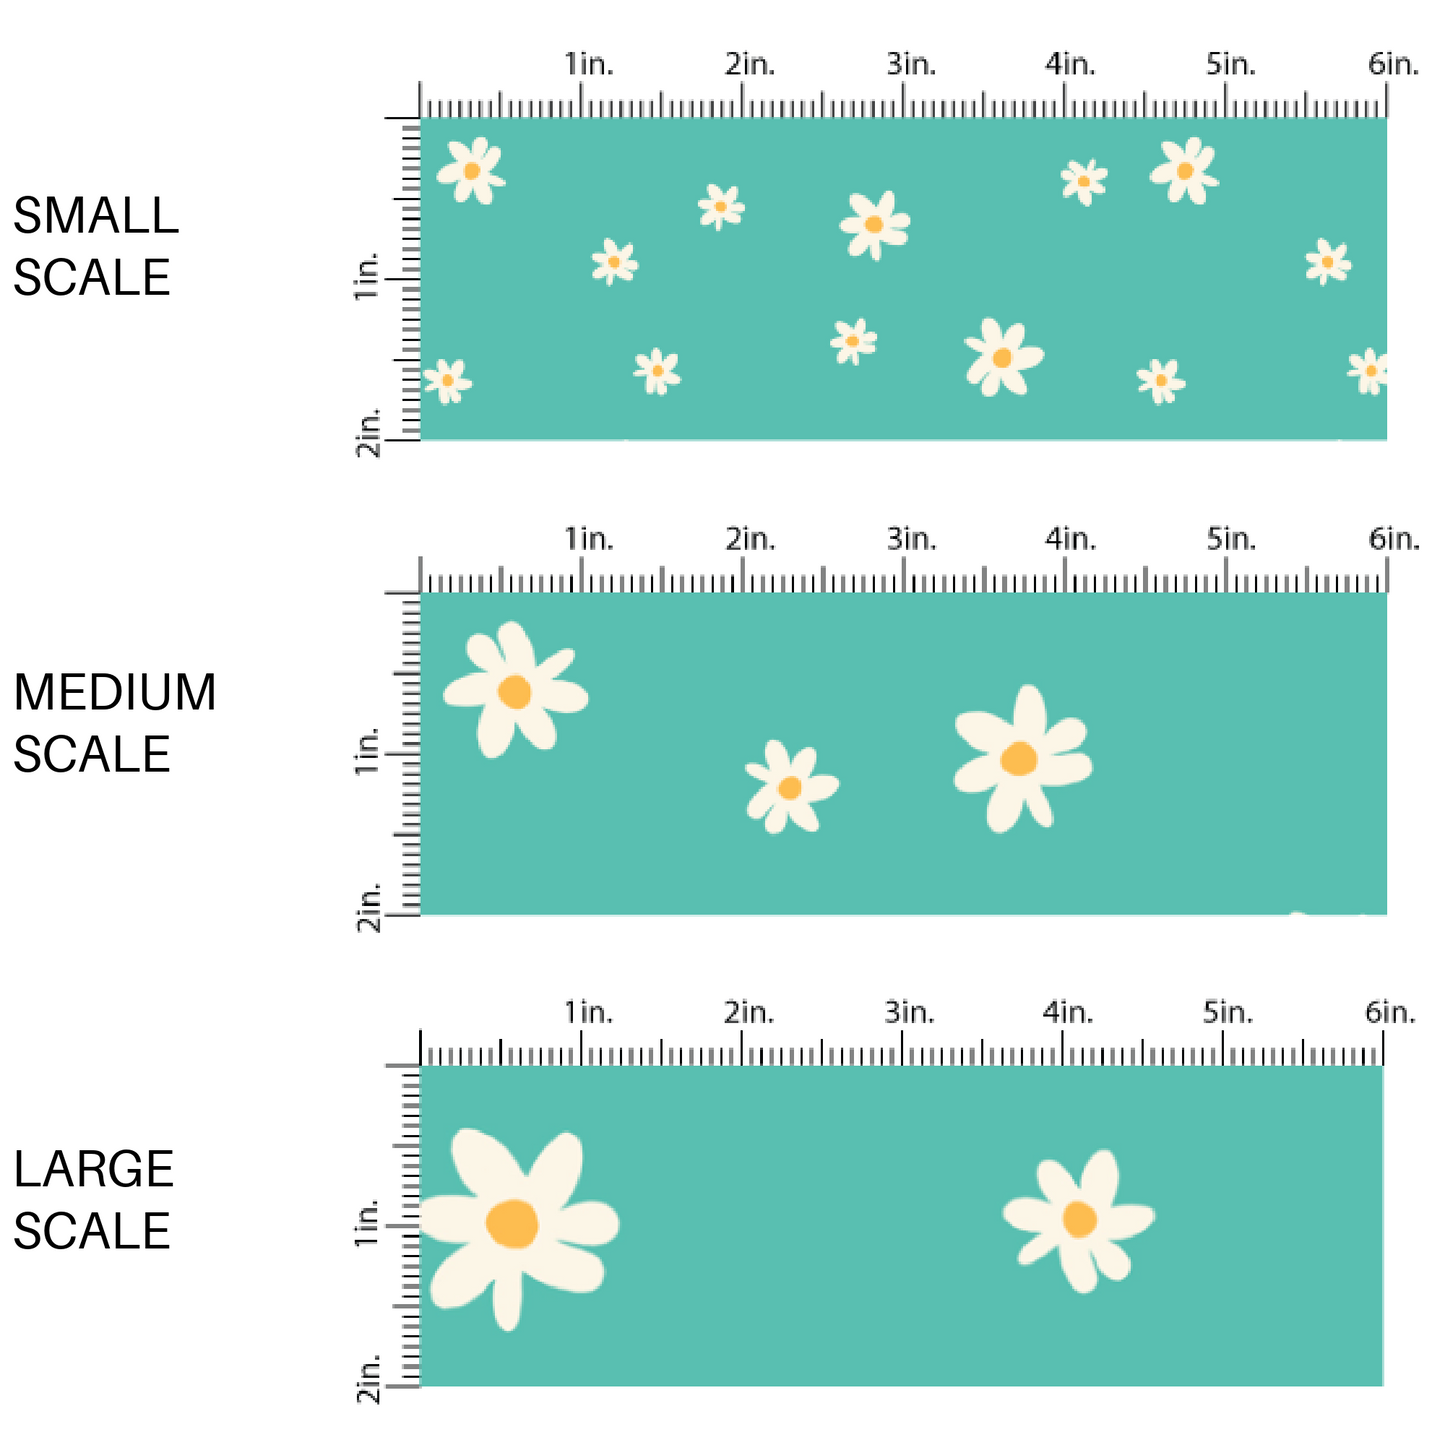 Aqua blue fabric by the yard scaled image guide with white scattered daisies